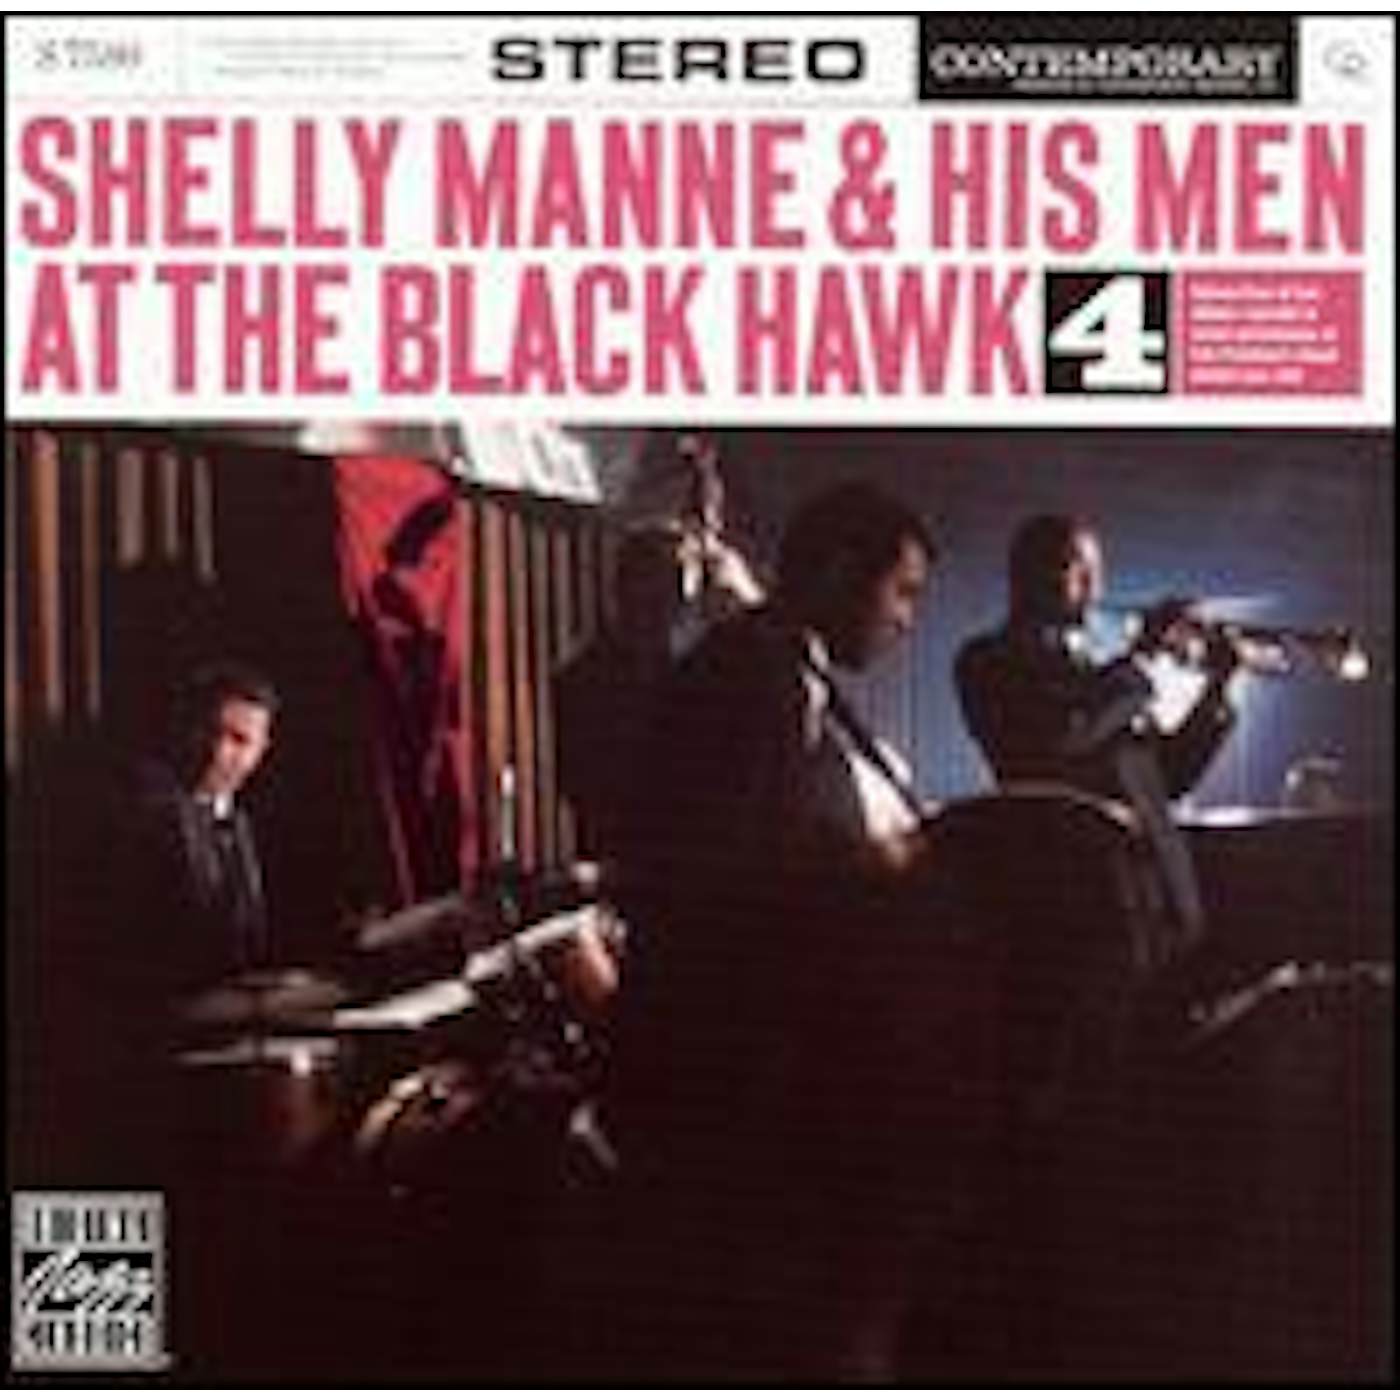 Shelly Manne & His Men LIVE AT THE BLACK HAWK 4 CD